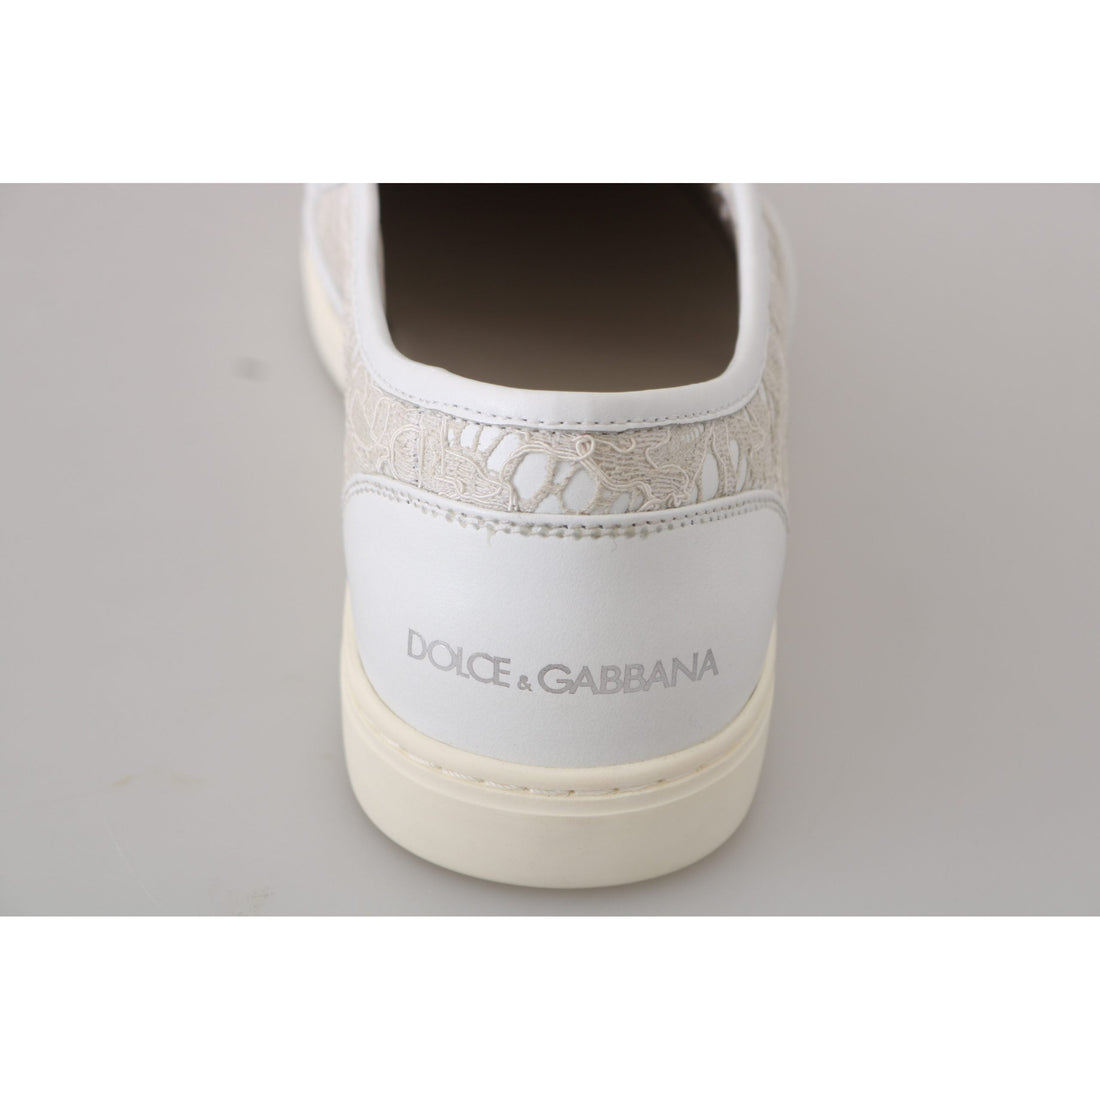 Dolce & Gabbana White Leather Lace Slip On Loafers Shoes - Paris Deluxe